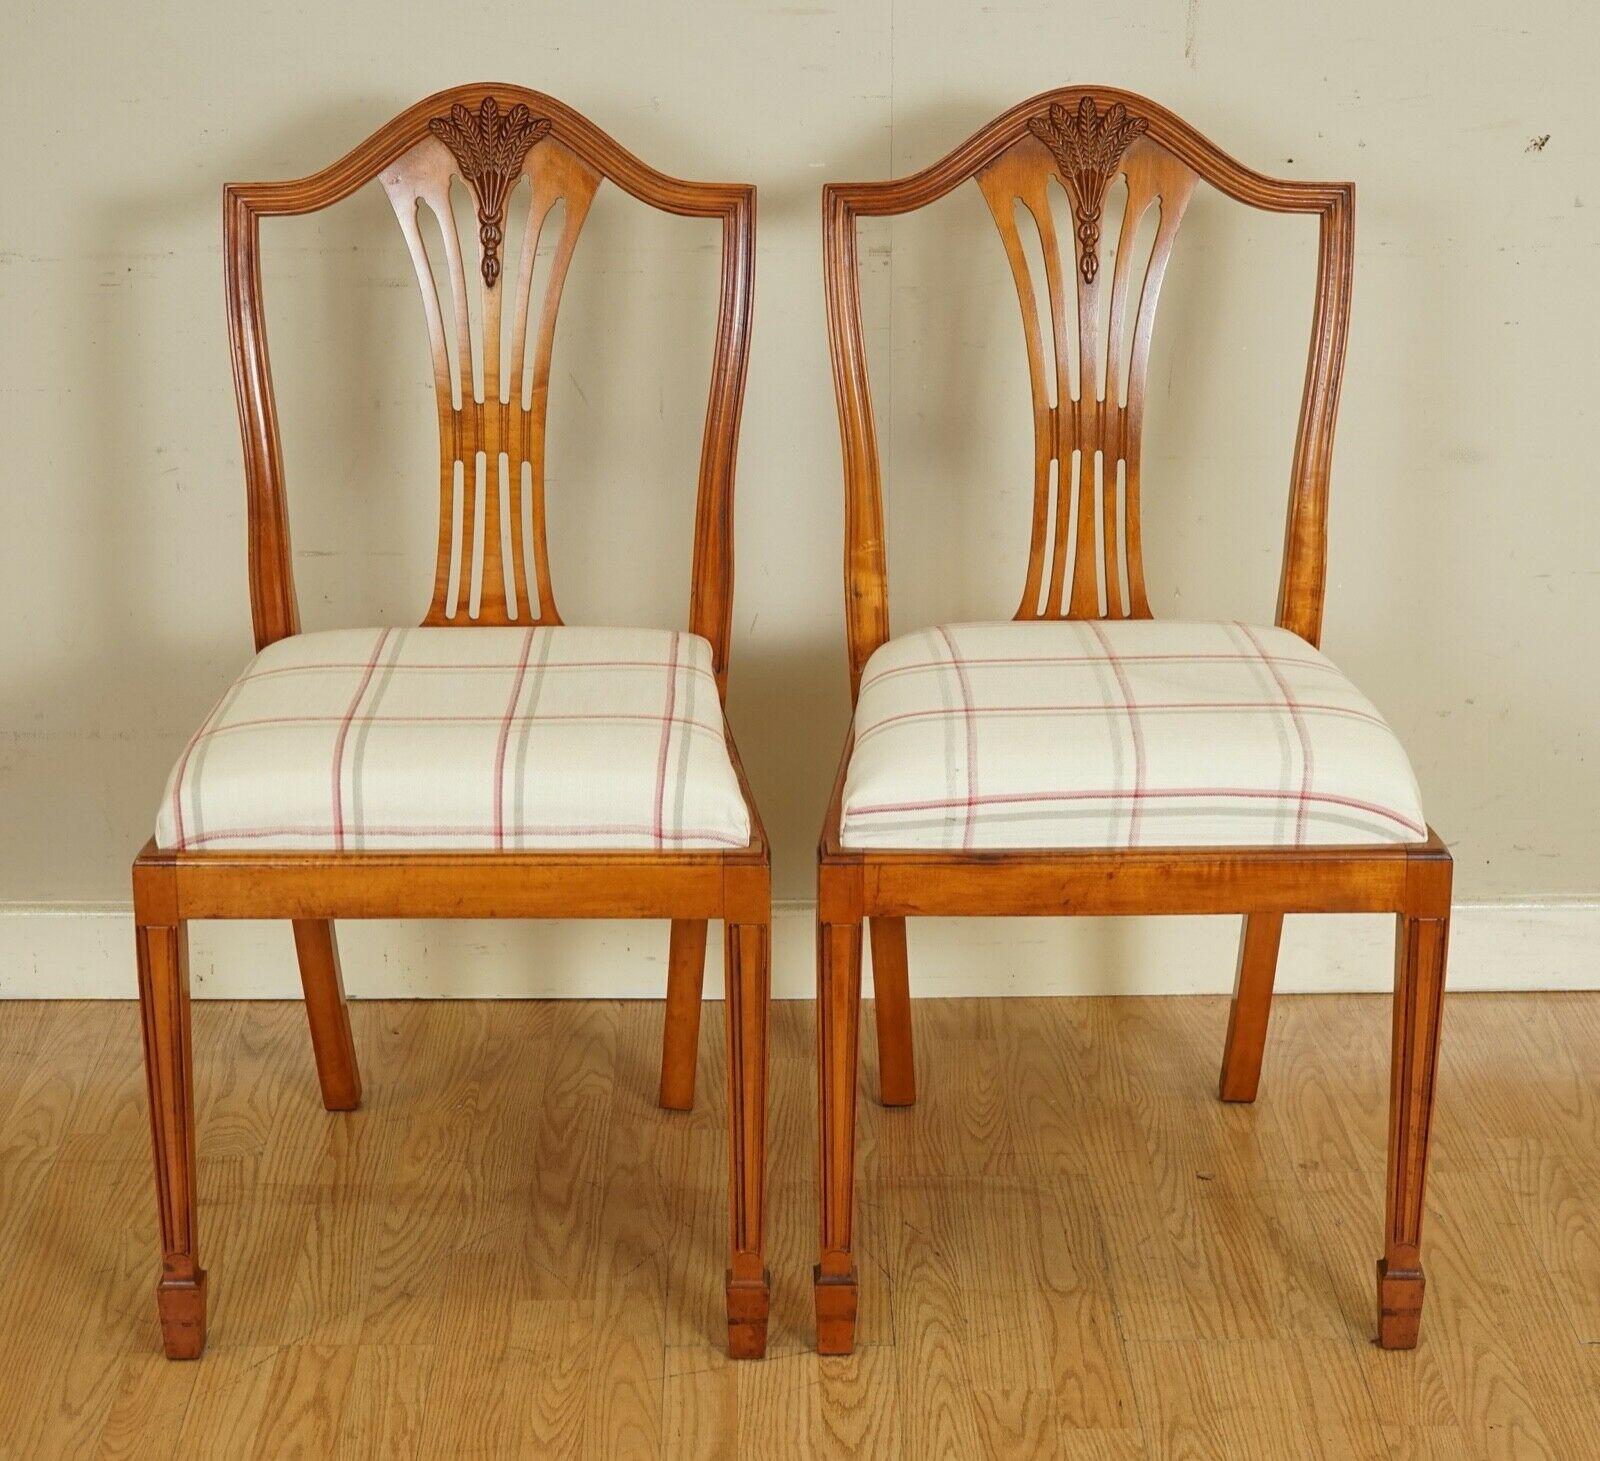 Hand-Crafted Very Lovely Brights of Nettlebed Wheatear Yew Wood Dinning Chairs